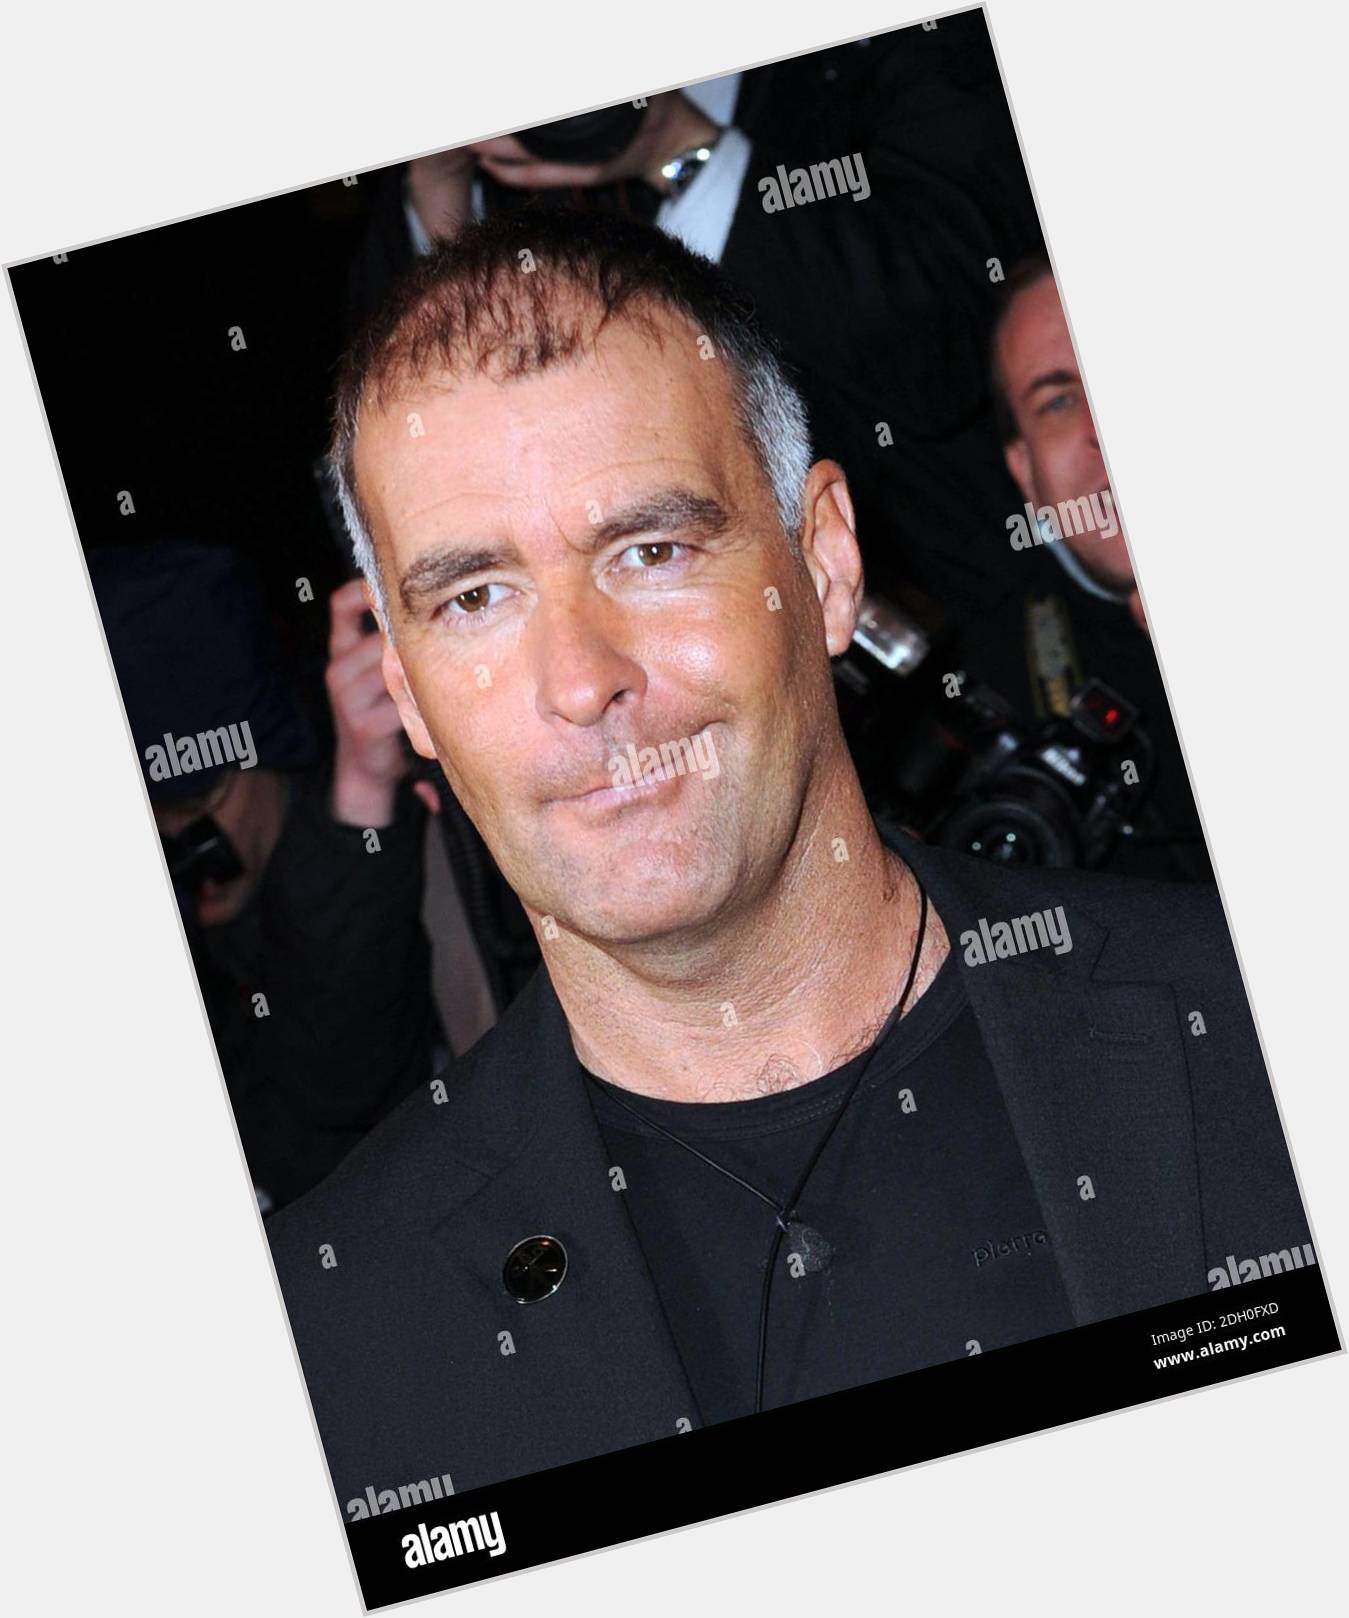 <a href="/hot-men/tommy-sheridan/where-dating-news-photos">Tommy Sheridan</a> Slim body,  salt and pepper hair & hairstyles